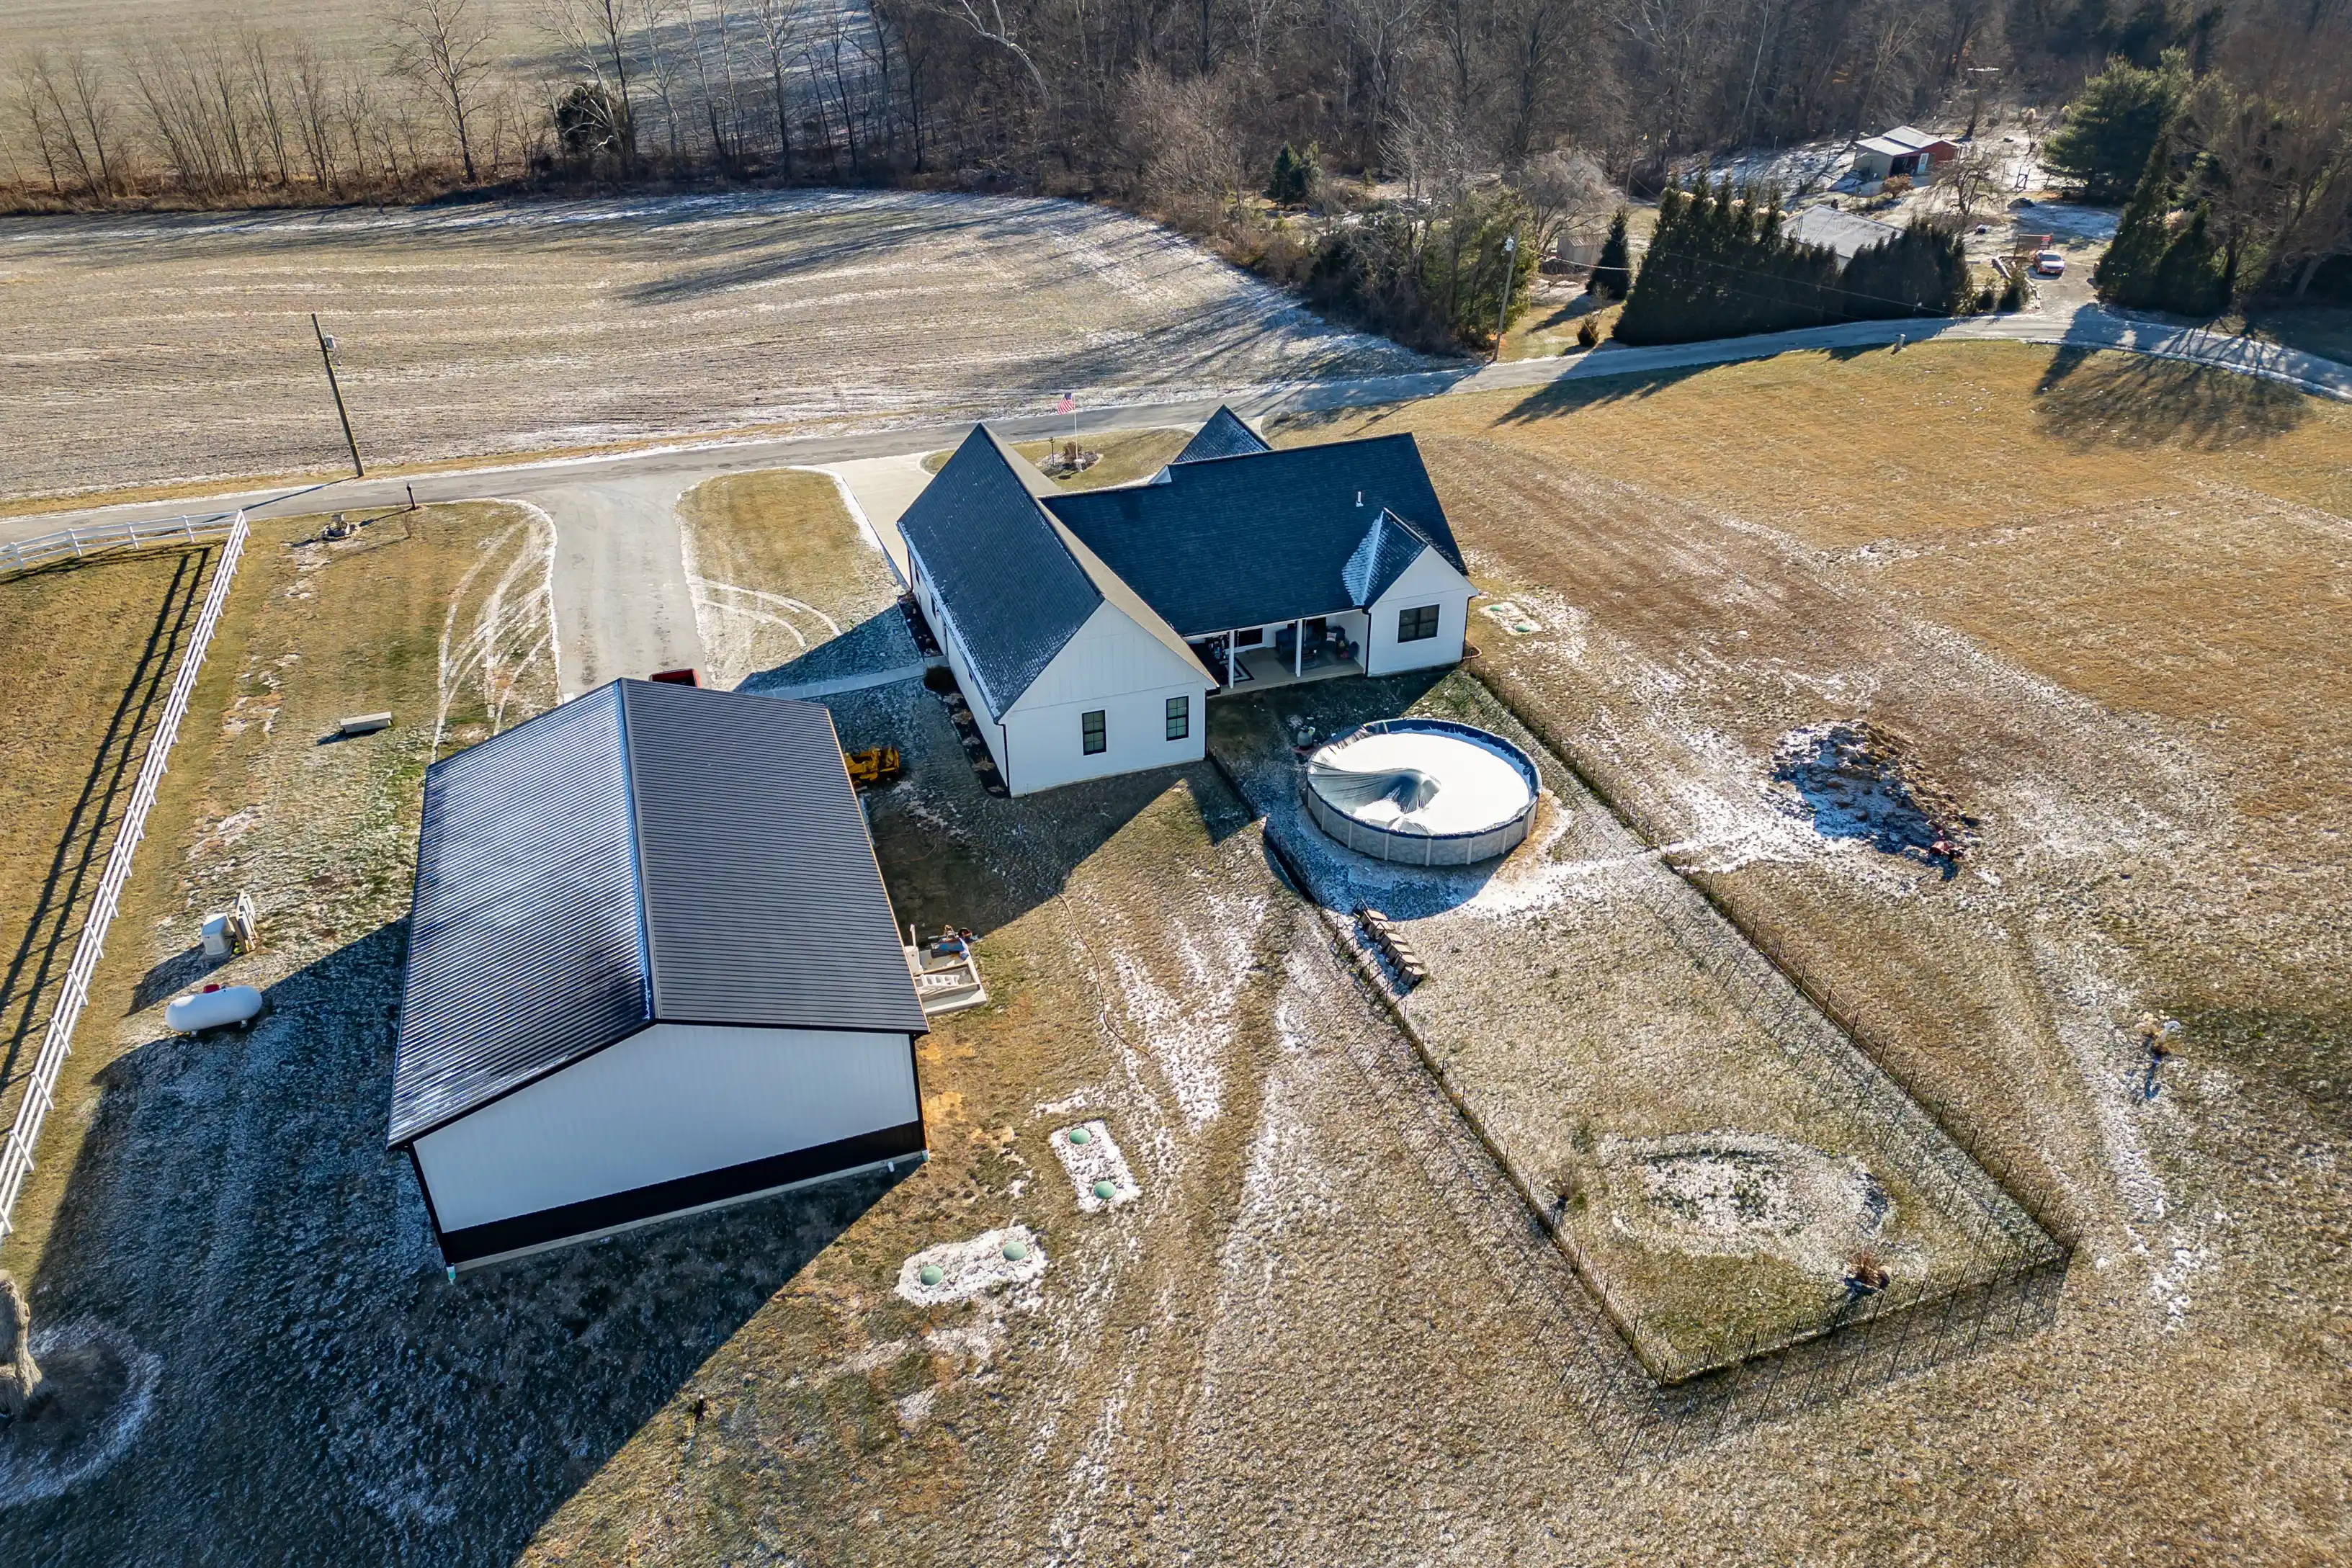 Aerial view of a rural residential property with a house, detached garage, above-ground pool, and surrounding fields in a sparse snowy landscape.